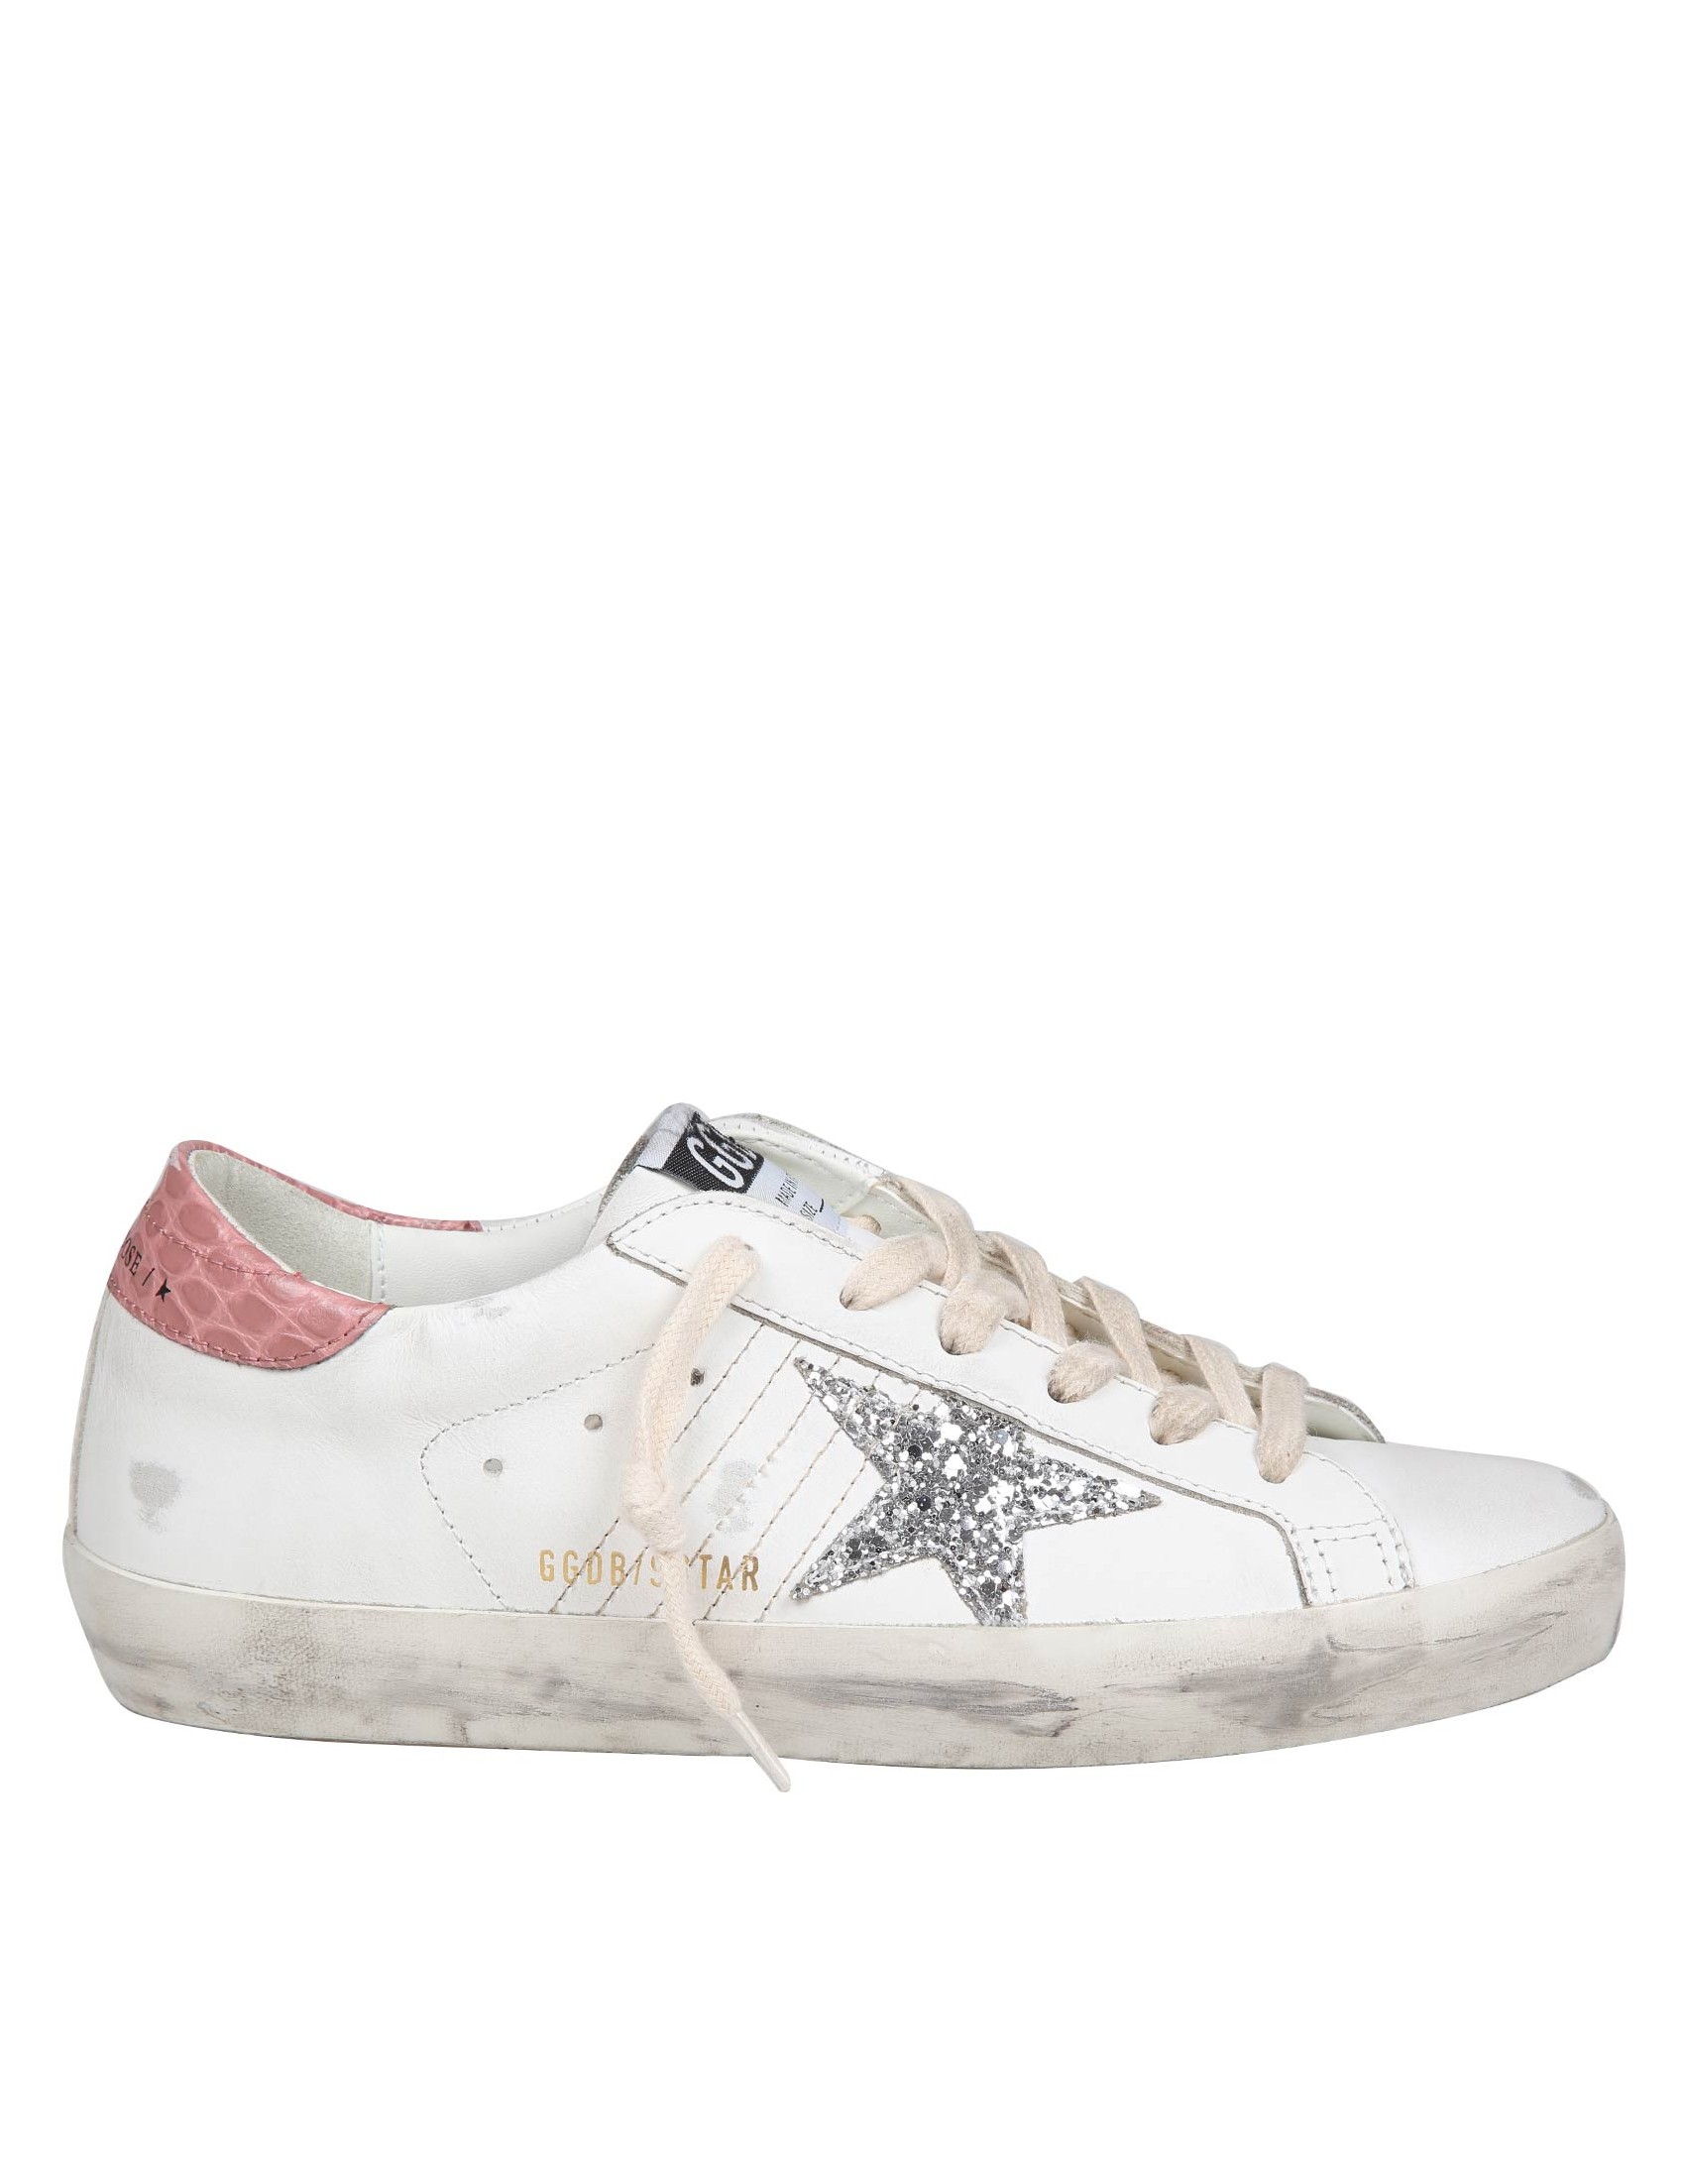 GOLDEN GOOSE SUPER STAR SNEAKERS IN WHITE/PINK LEATHER